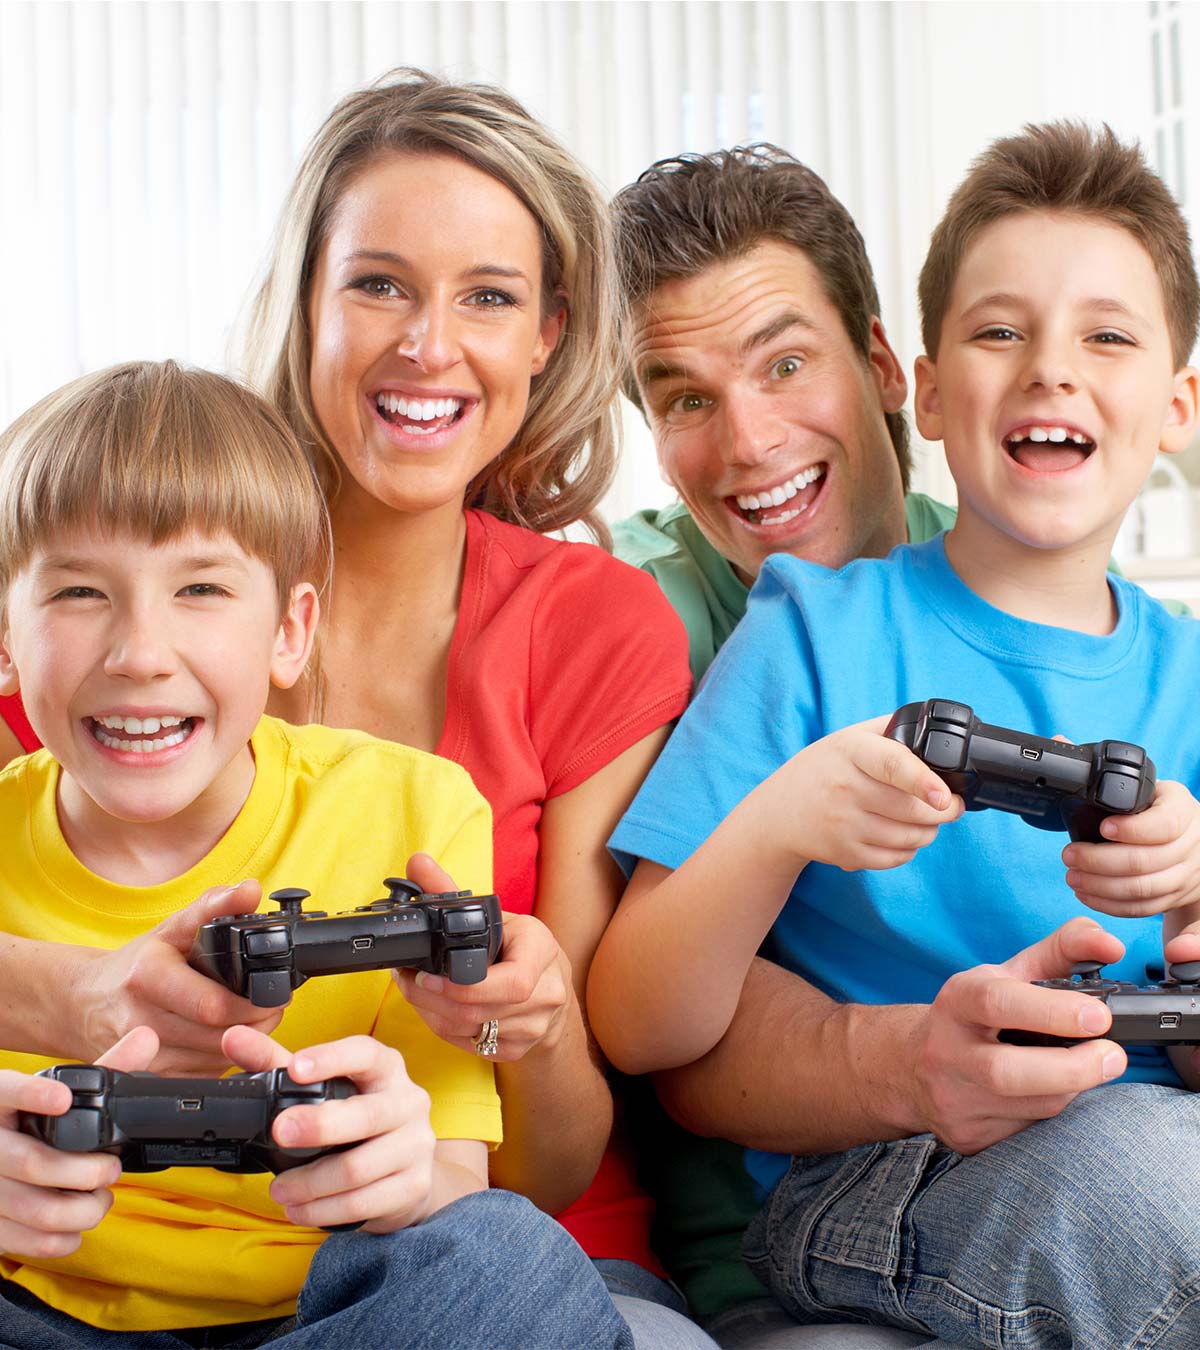 23 Best PS3 Games For Kids And Family In 2023 - MomJunction